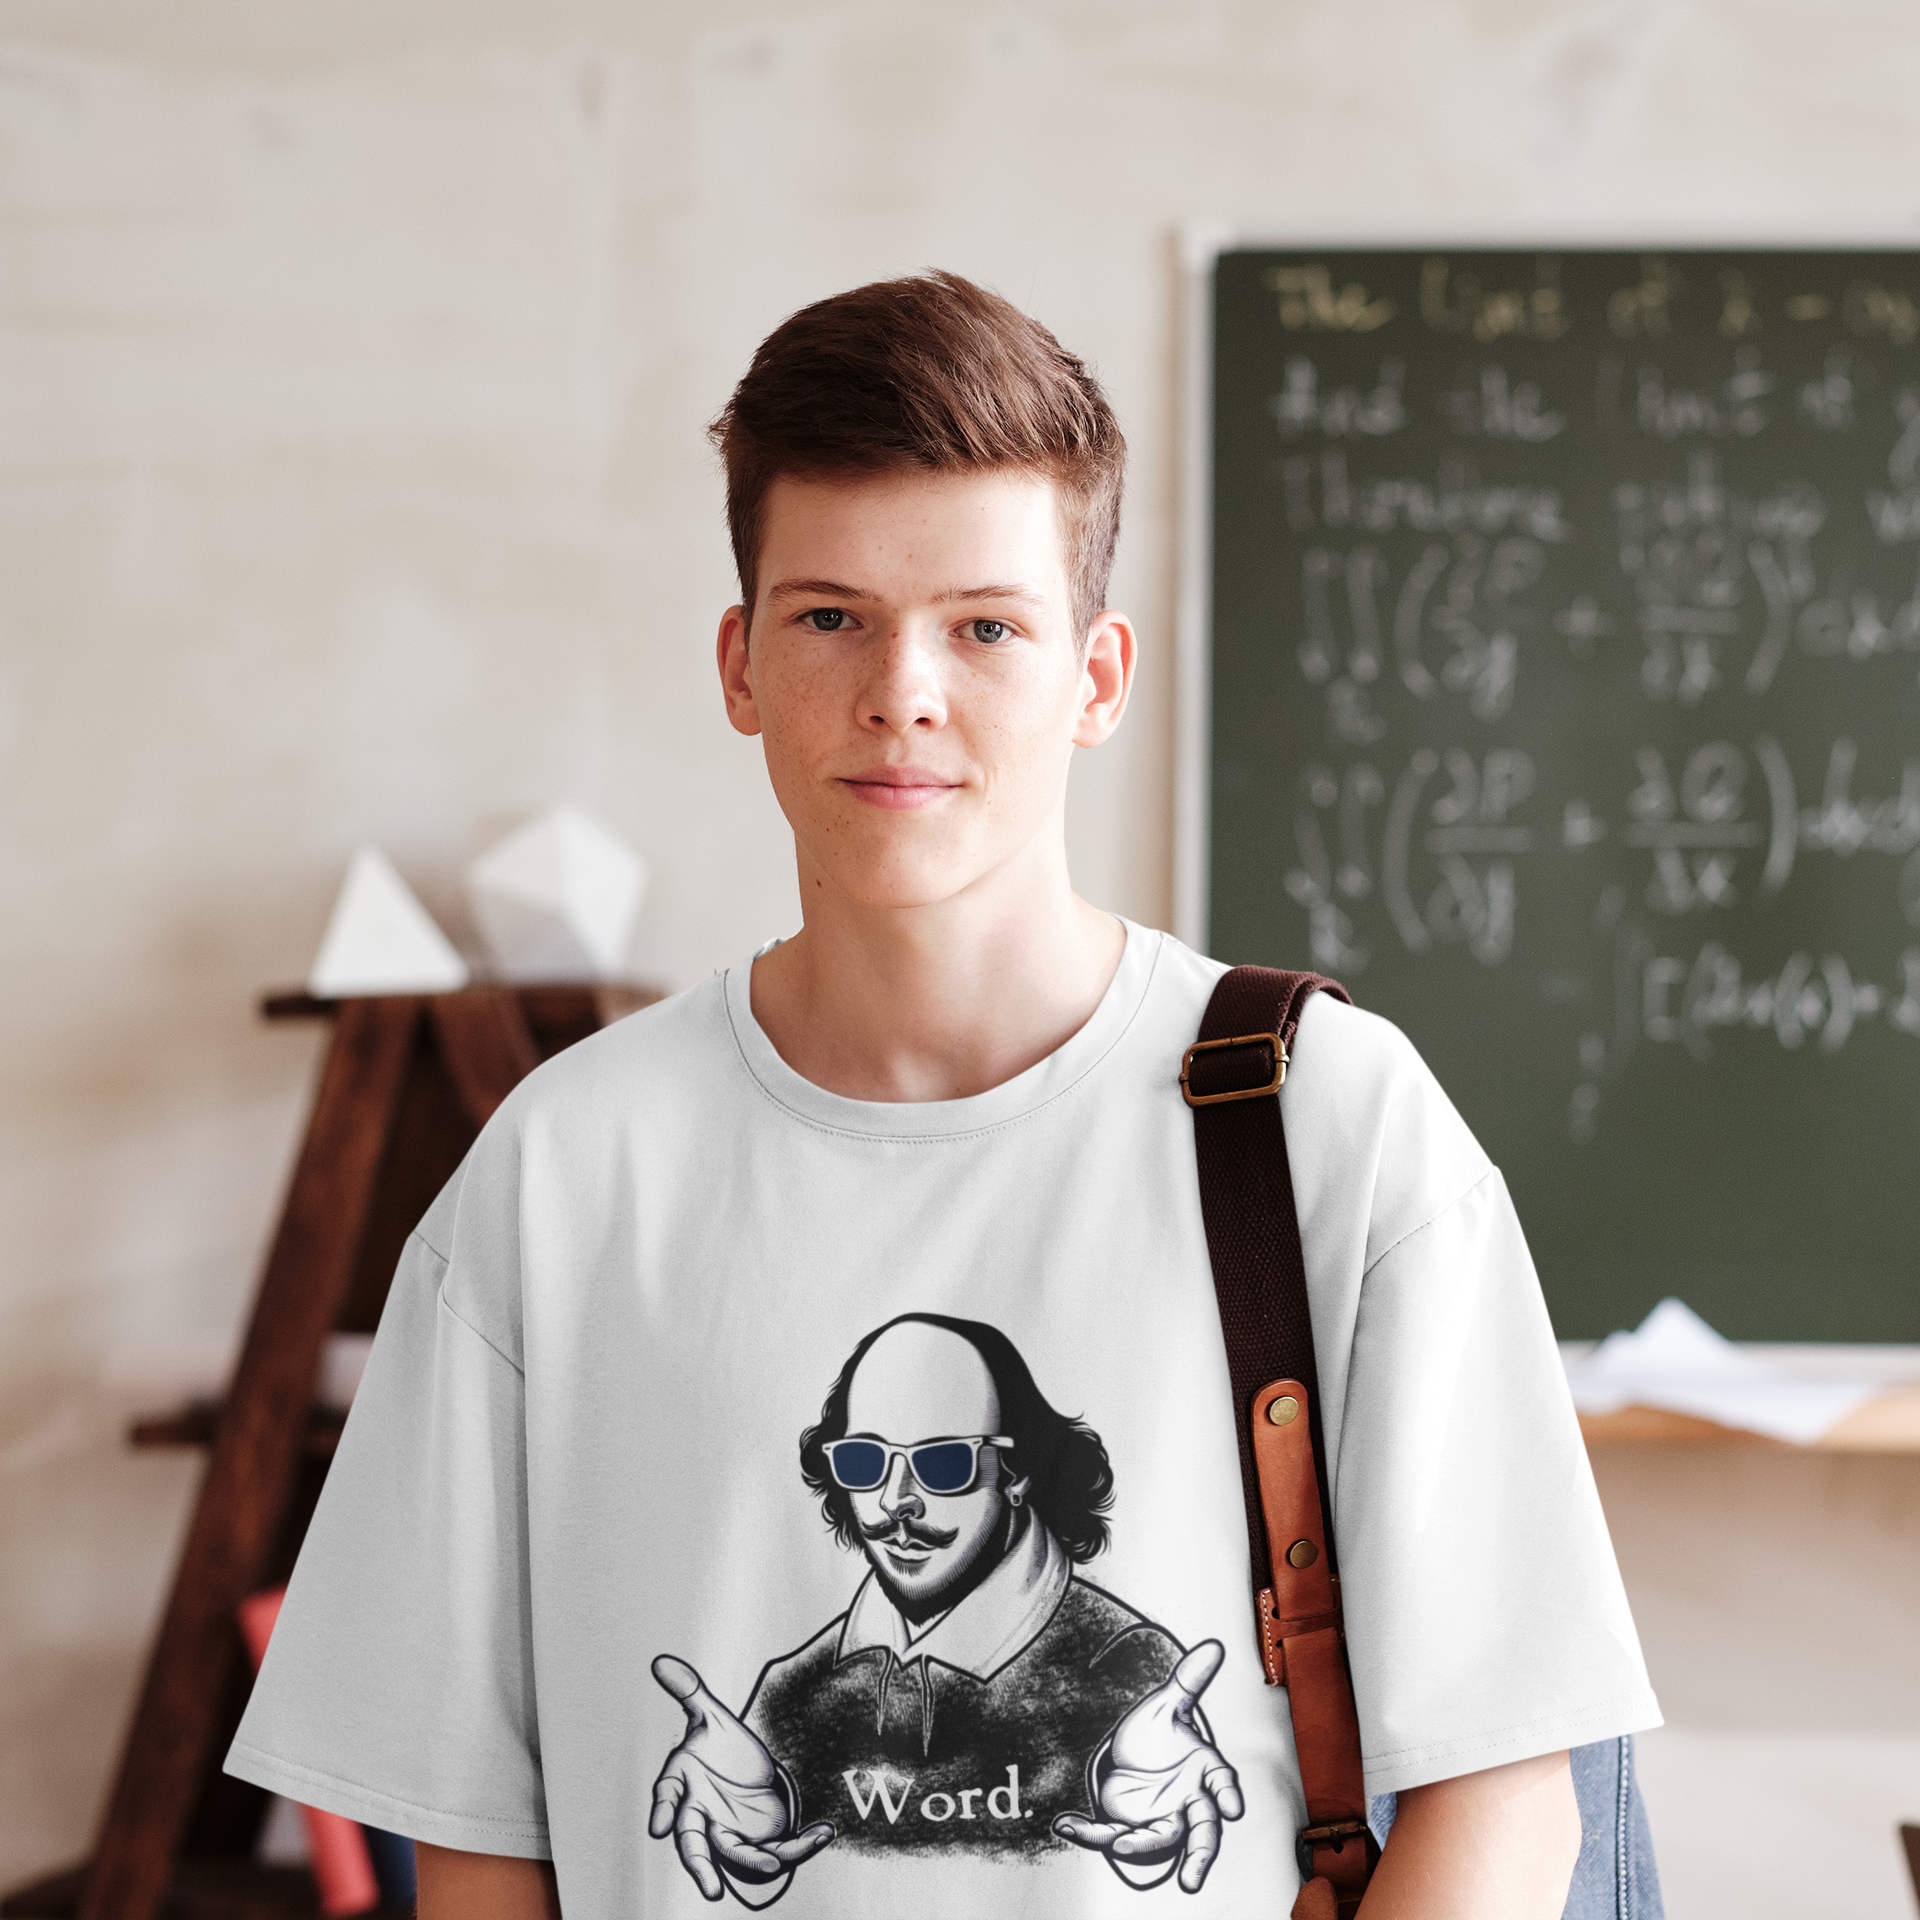 Male teen student wearing Shakespeare word t-shirt